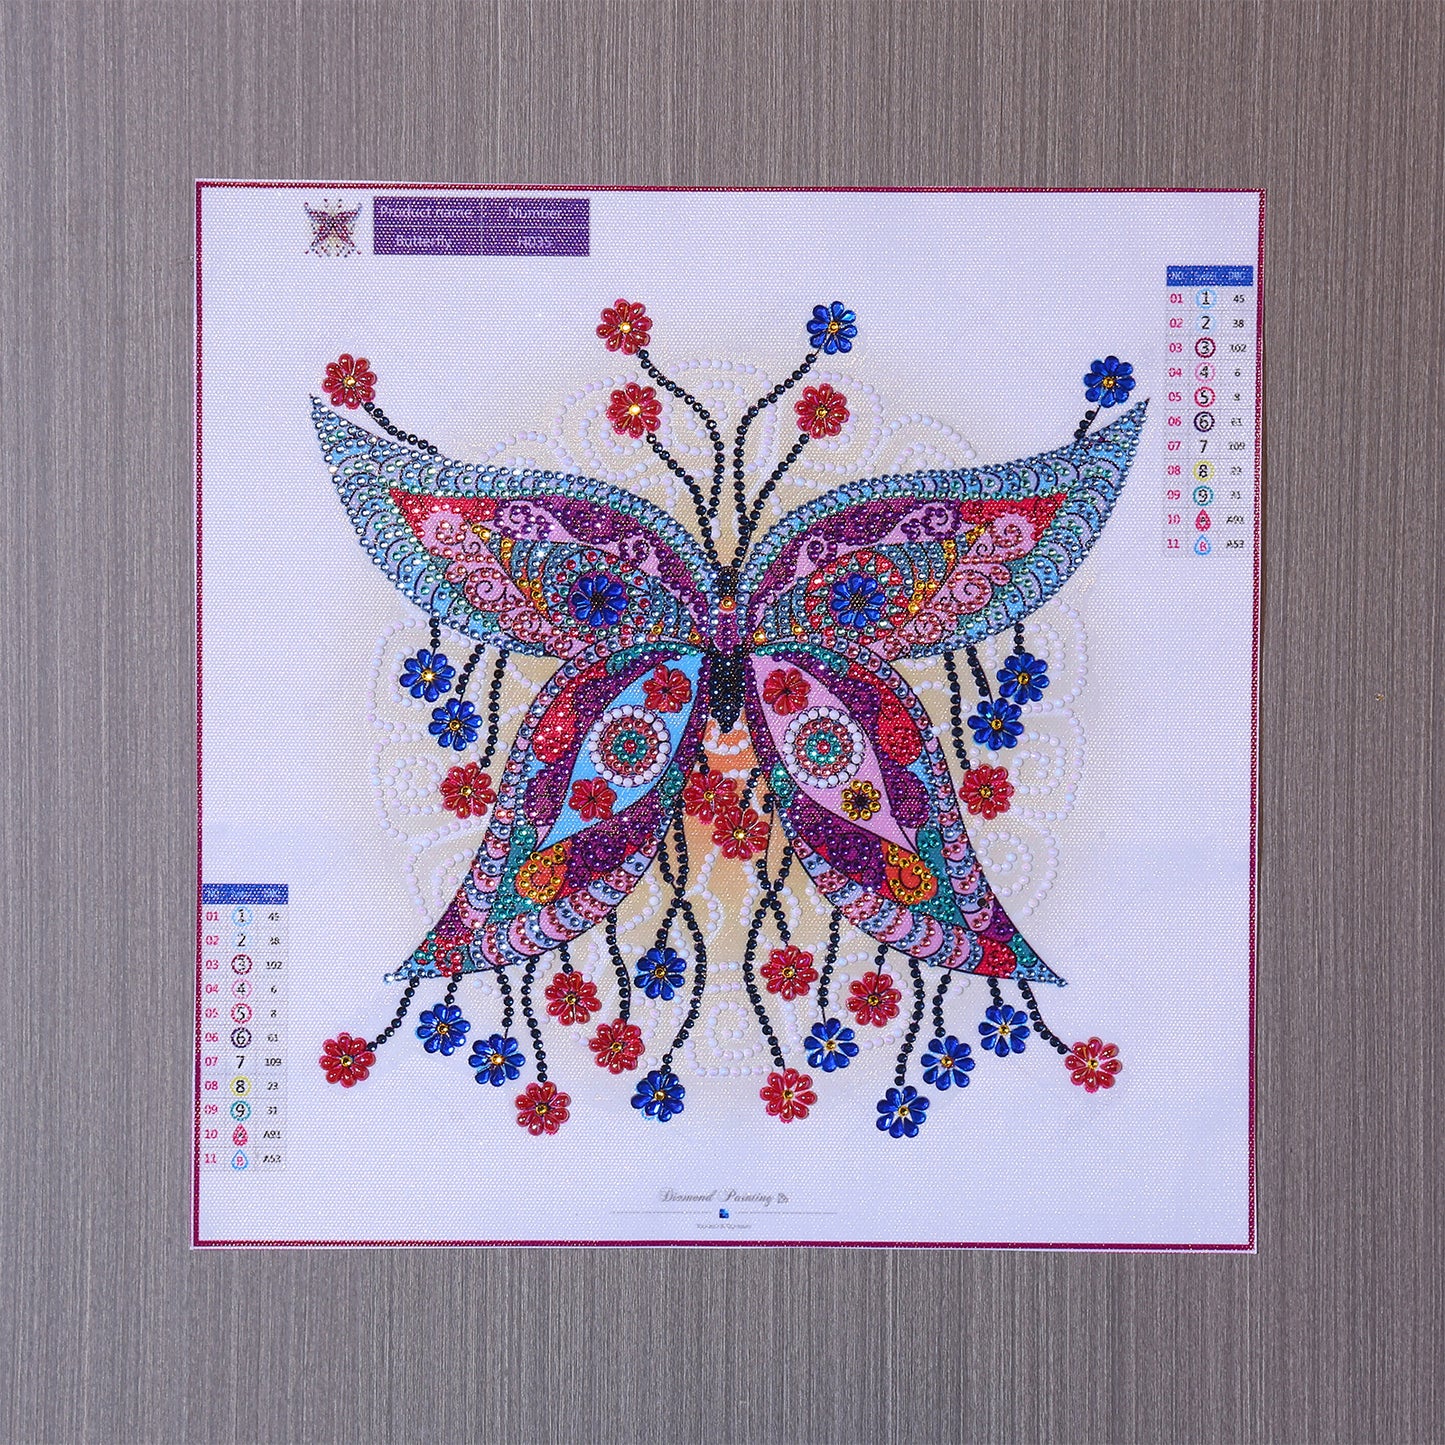 Shinning Butterfly Diamond Paint Kit 5D DIY Mosaic Picture Crafts Art Hobby Diamond Embroidery Cross Stitch Home Decor